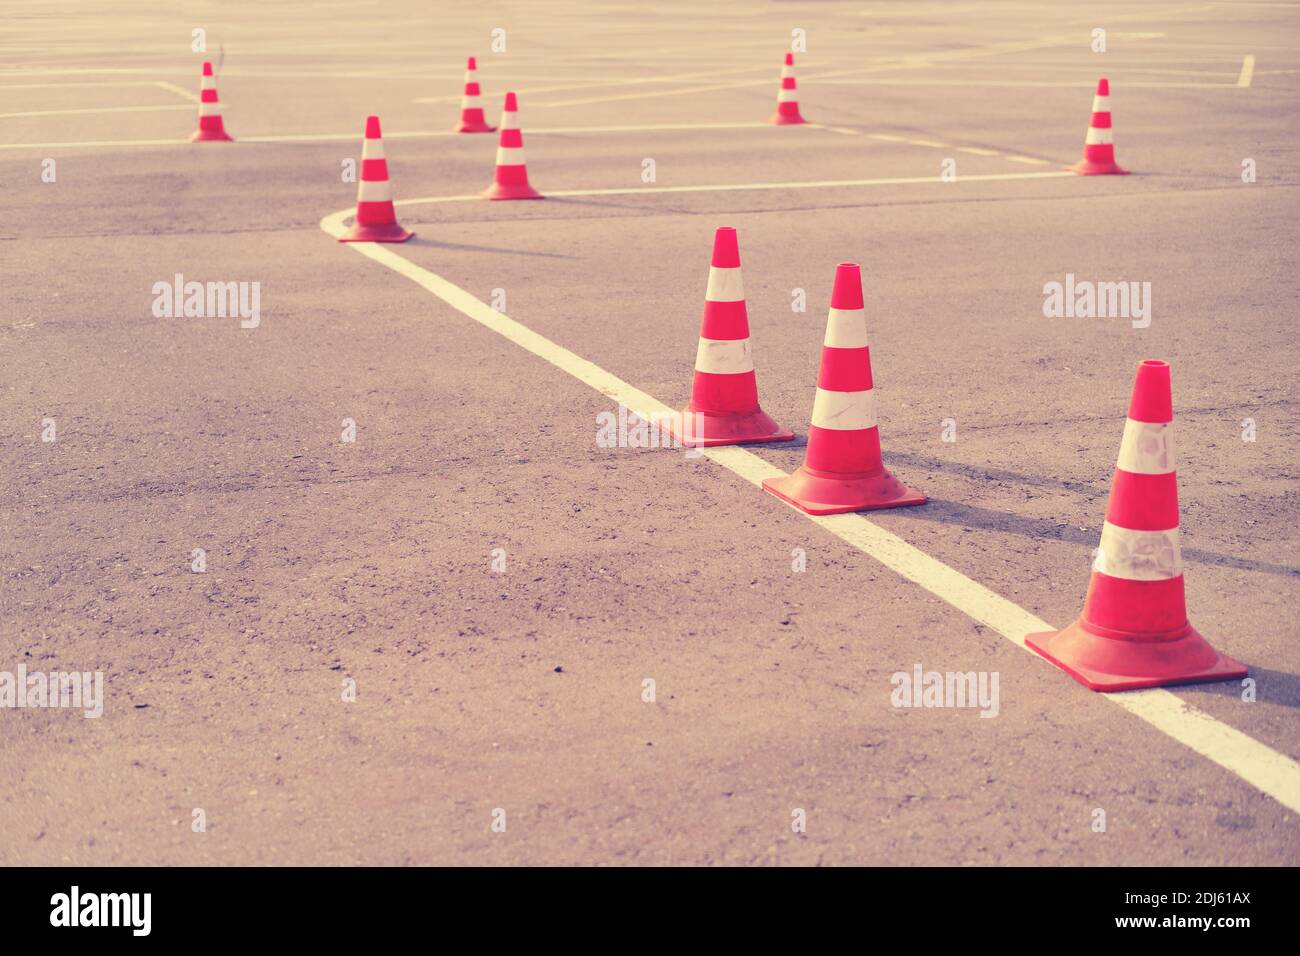 Red Cones On A Driving Training And Parallel Parking Area Stock Photo Alamy